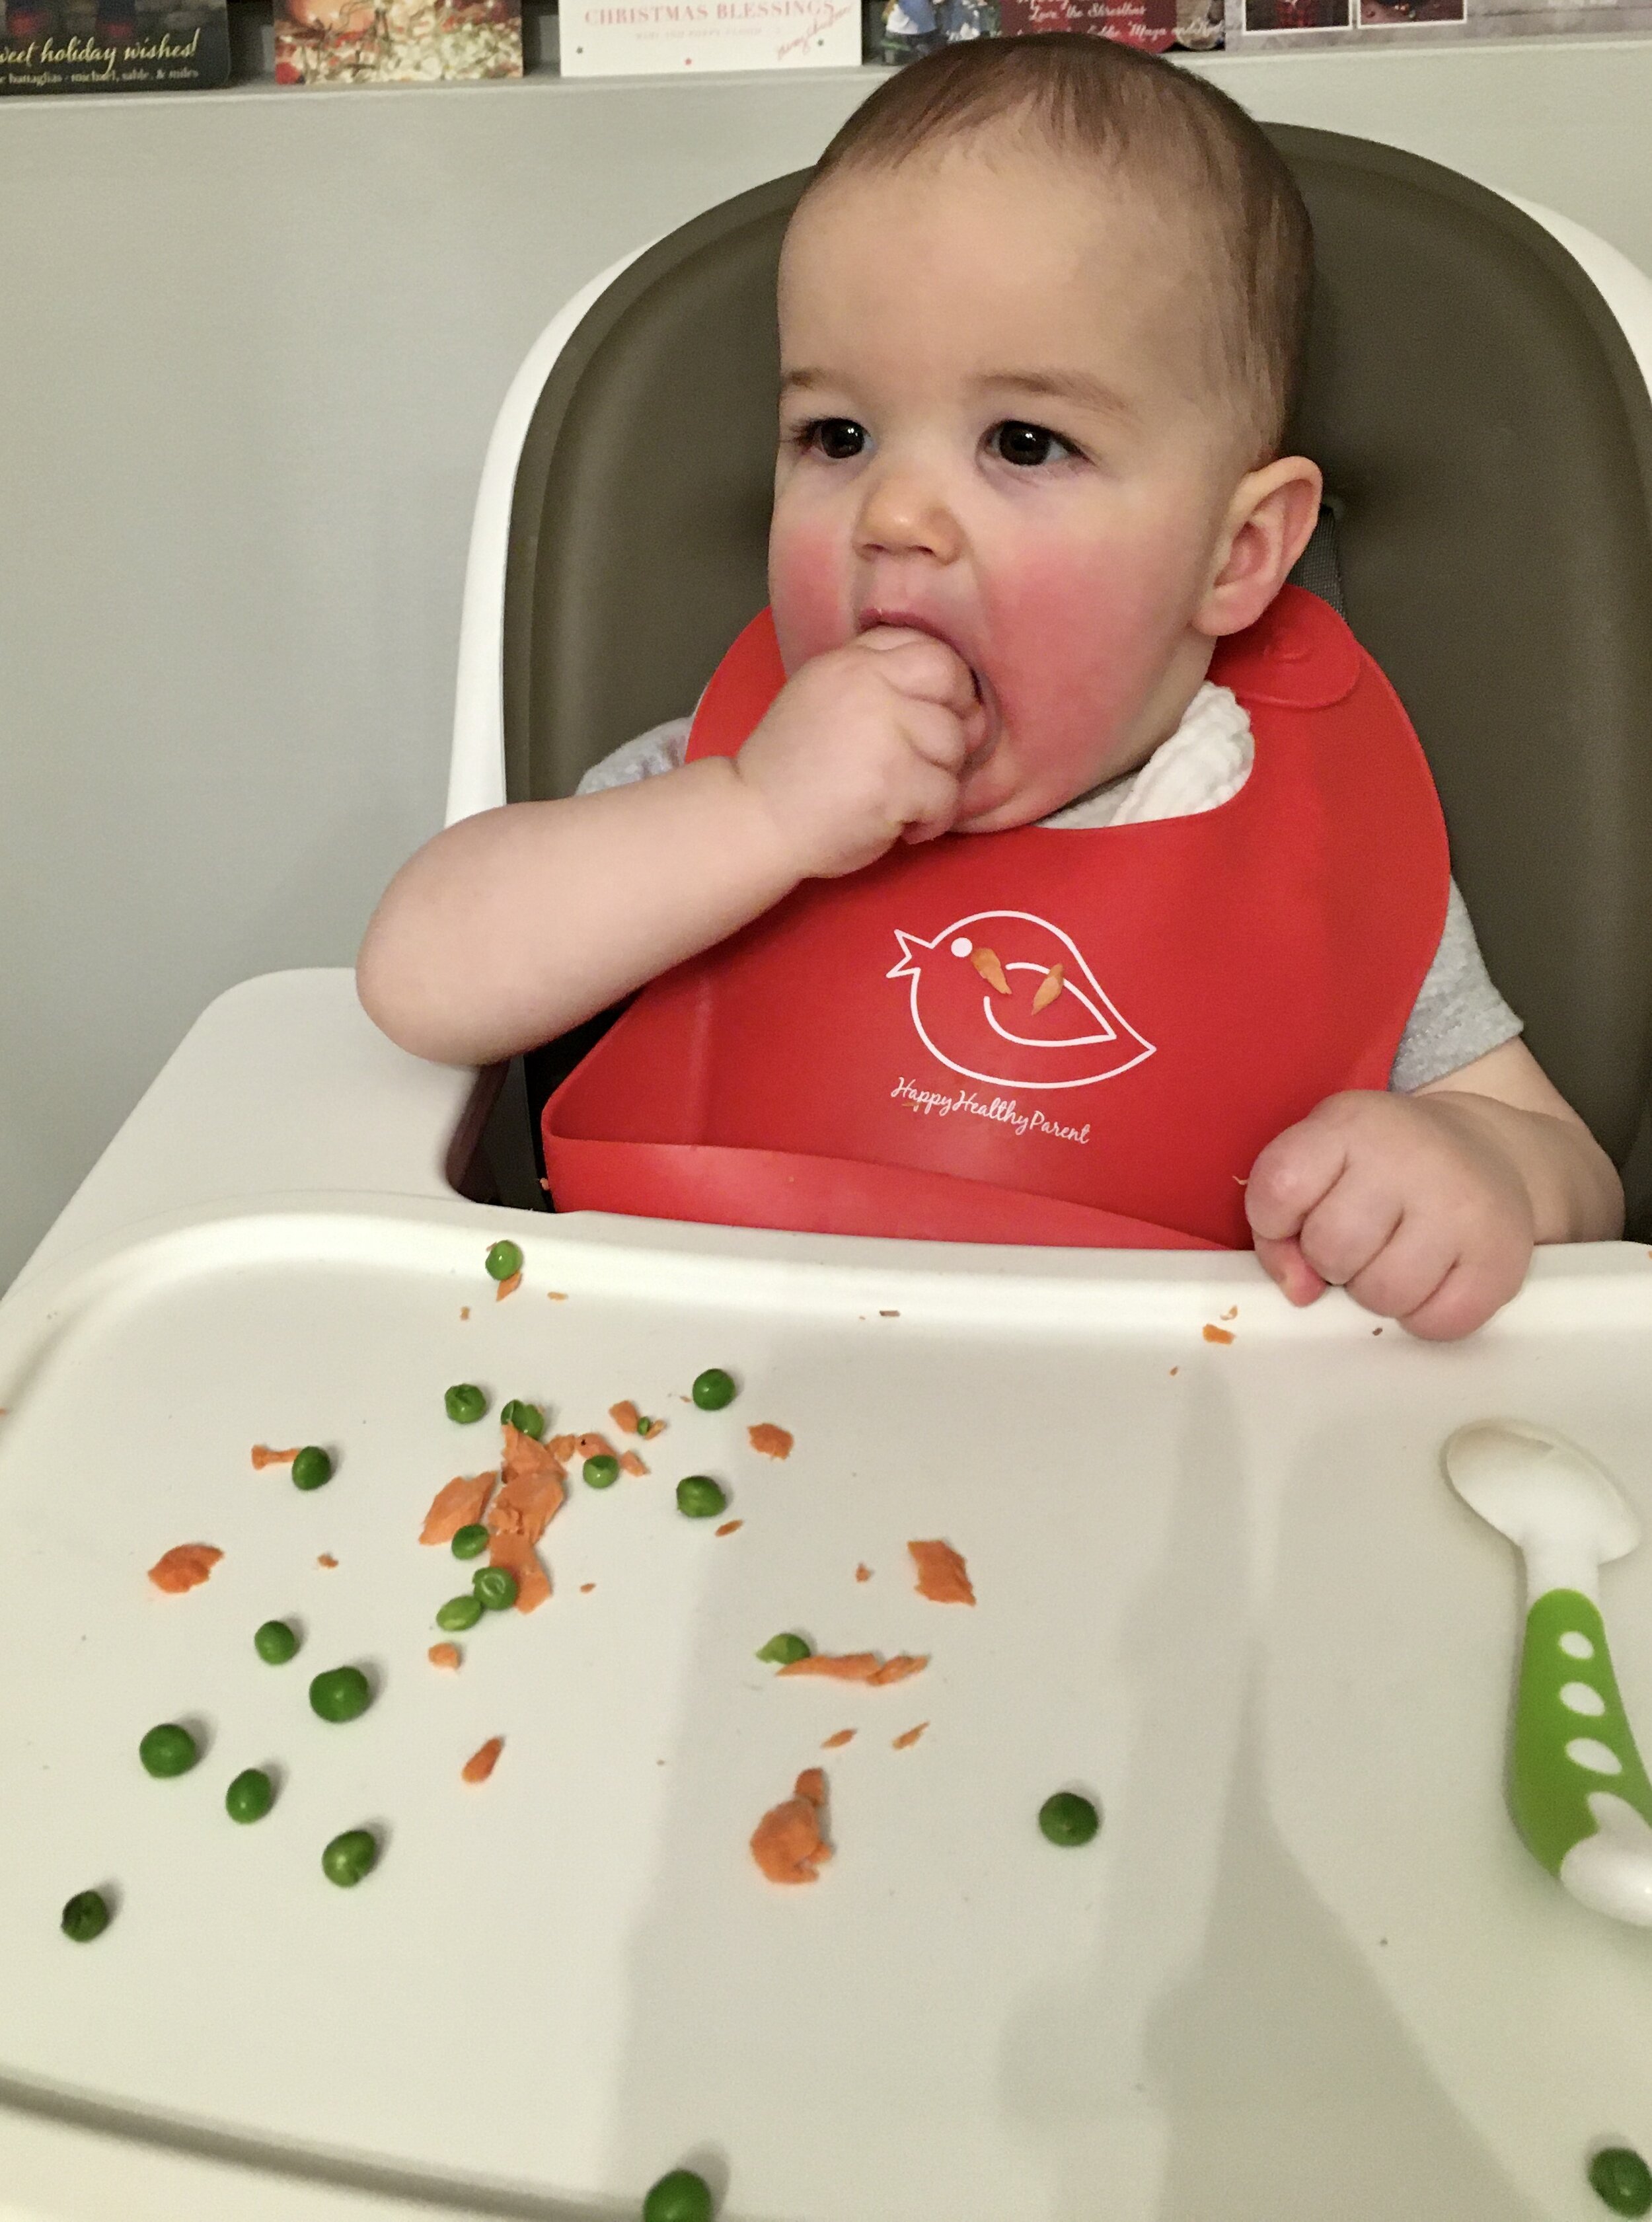 Can Babies Eat Solids Before Teeth? - JLD Therapy